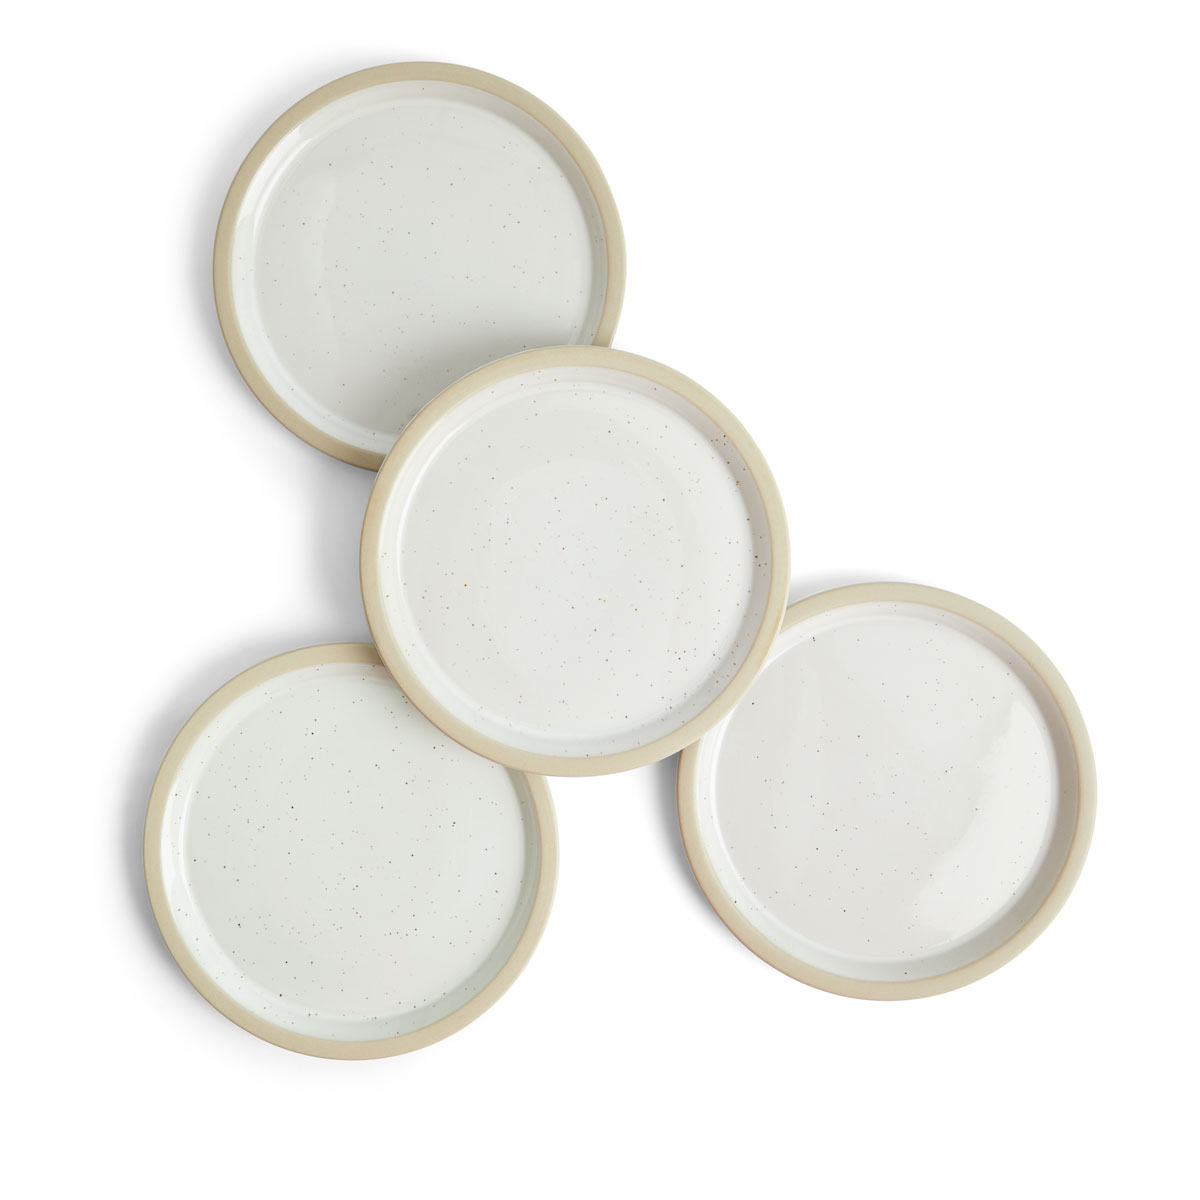 Royal Doulton Urban Dining Plate, Lid White Set of 4